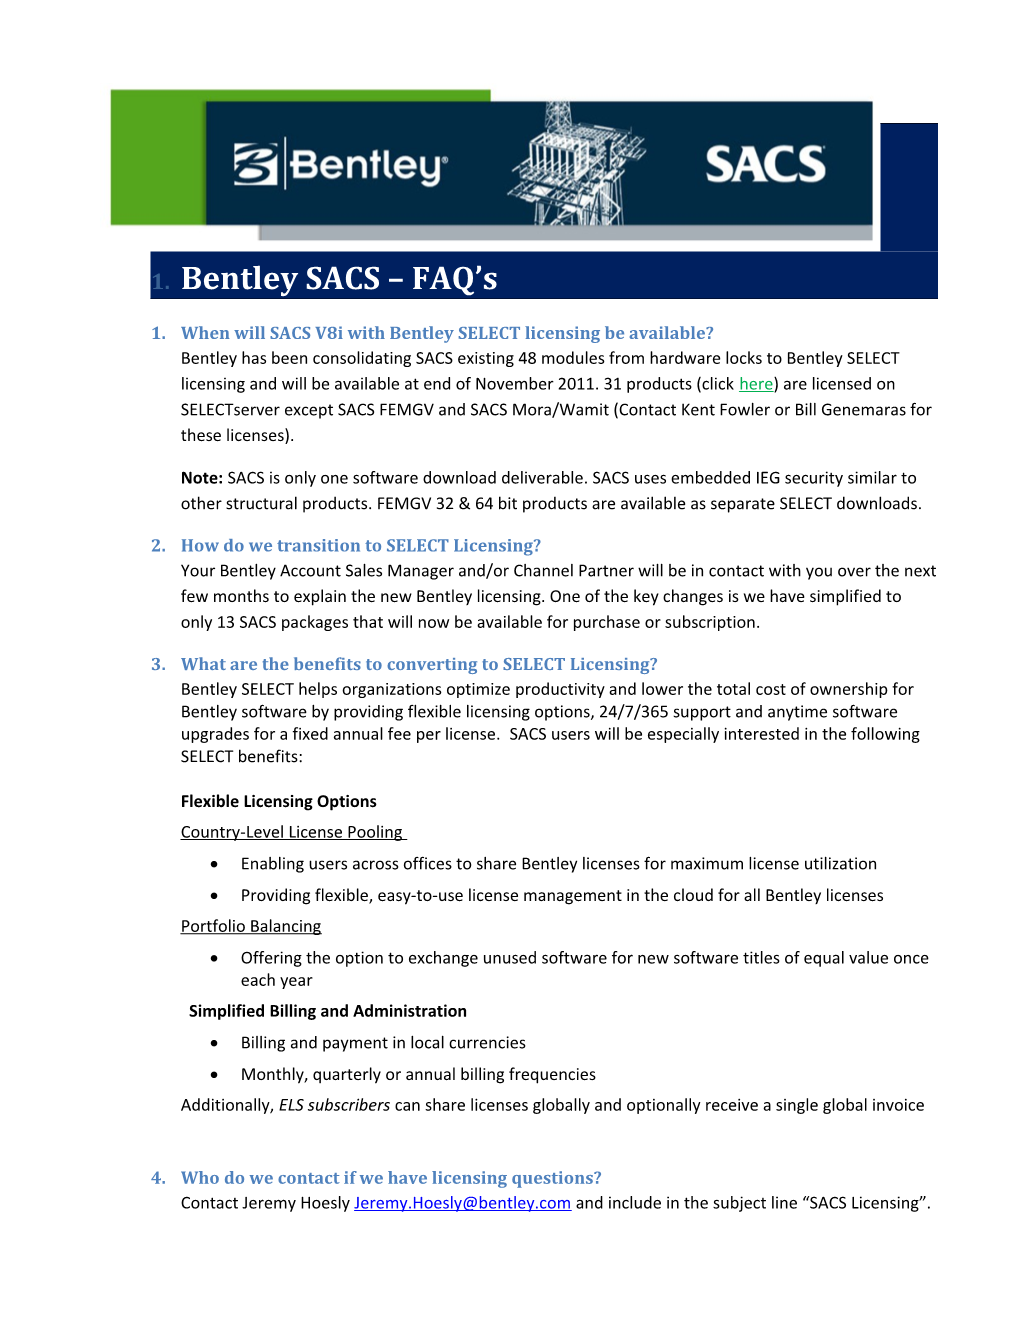 1.When Will SACS V8i with Bentley SELECT Licensing Be Available?